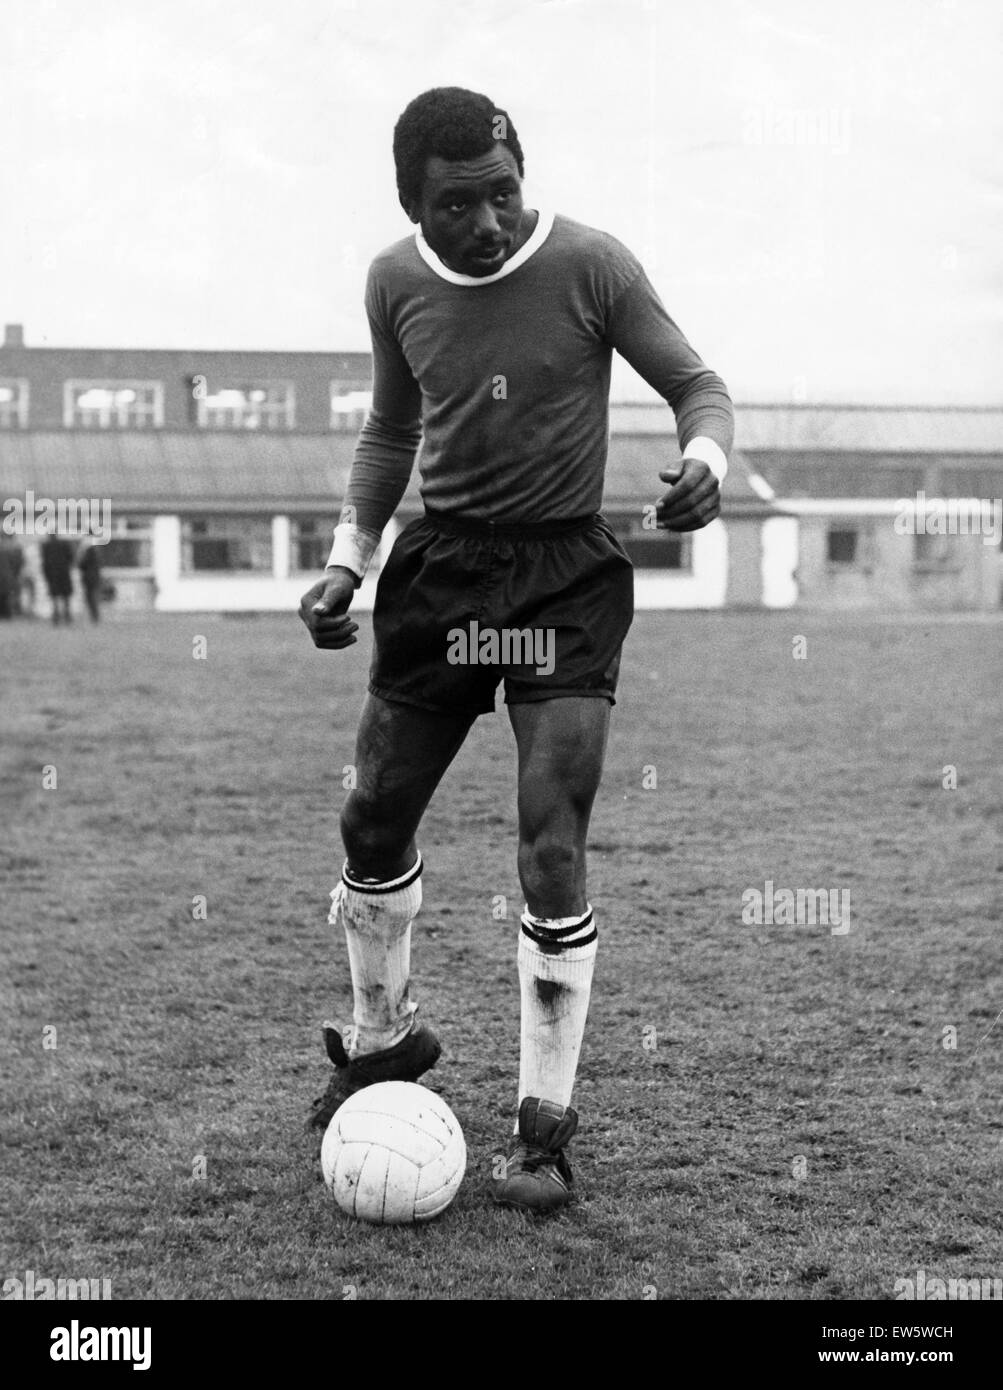 Benjamin Odeje will make history by becoming the first African to play soccer for England. 15-year-old Benjy, from Nigeria, has been picked for England schoolboys against Ireland at Wembley. 4th March 1971. Stock Photo